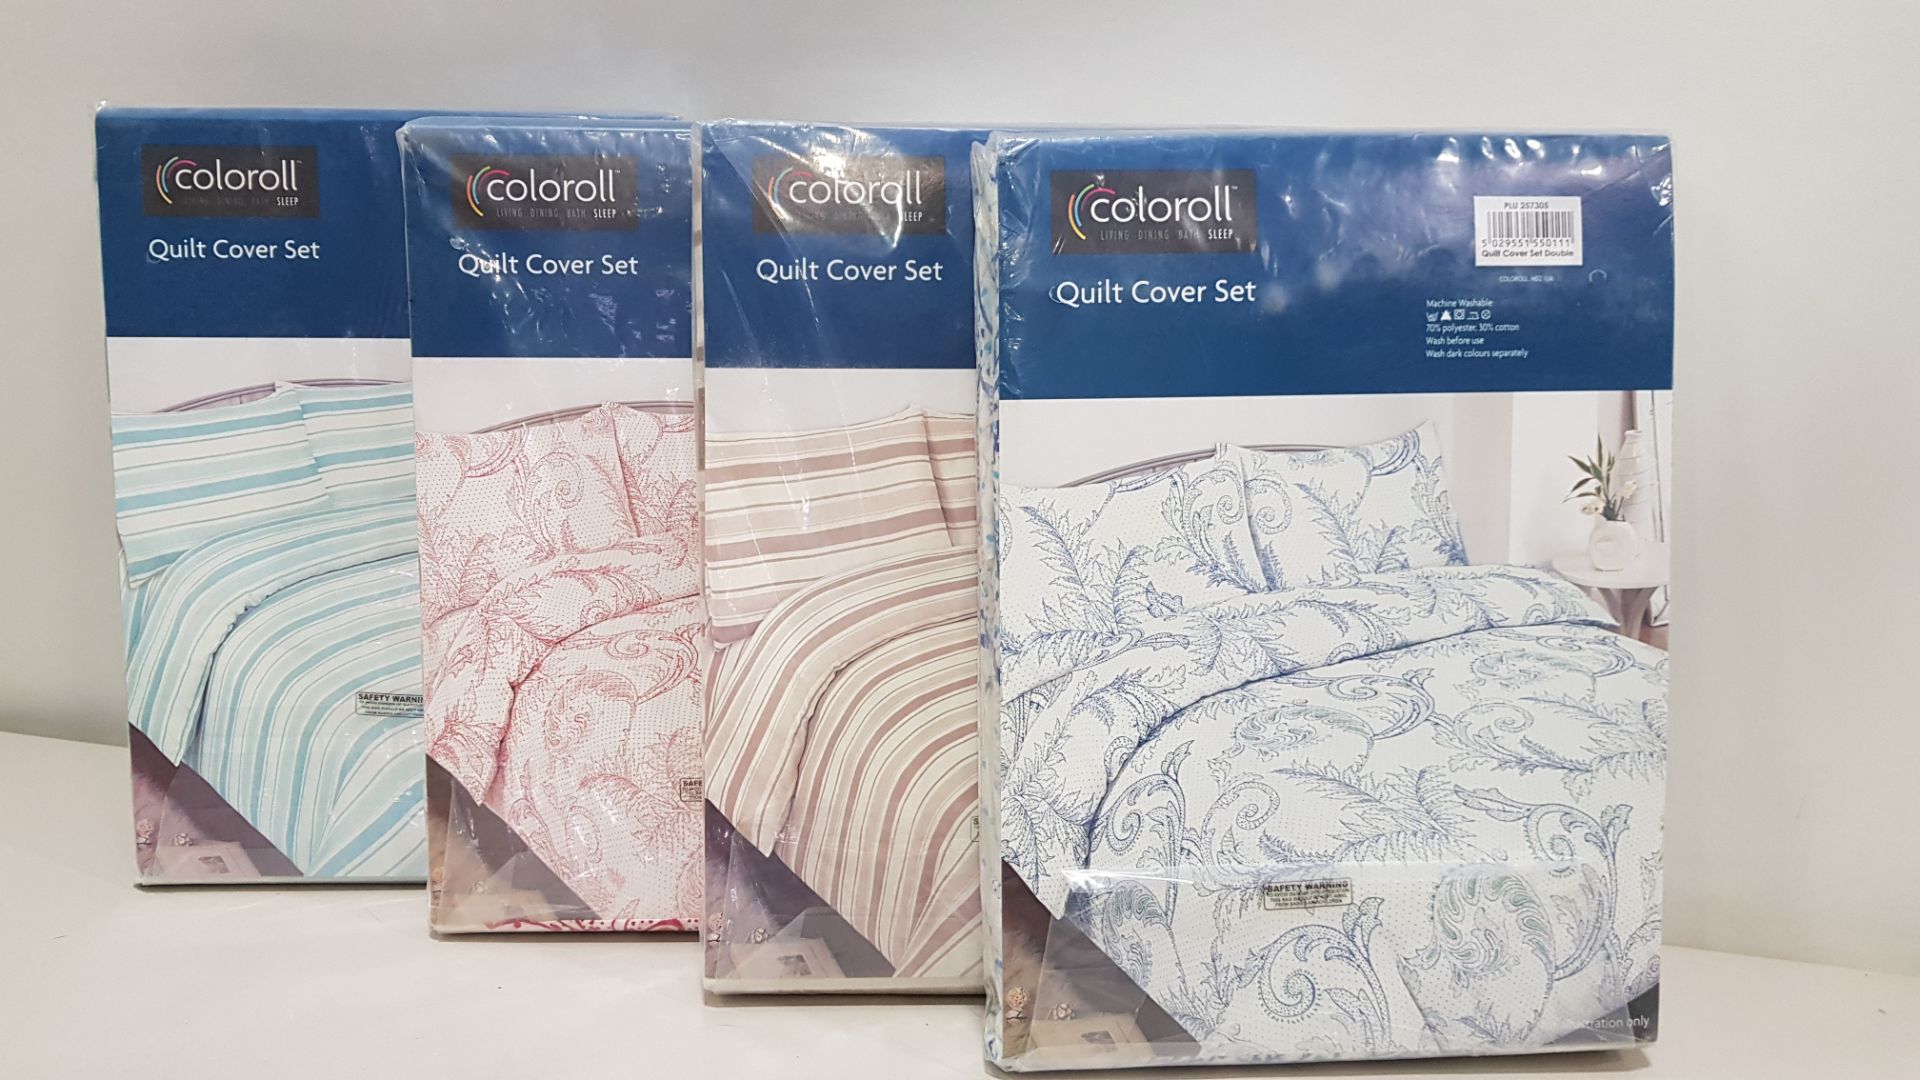 25 X ESSENTIAL COLOROLL DOUBLE DUVET SETS IN VARIOUS STYLES IE BLUE FLORAL, PINK FLORAL, BLUE